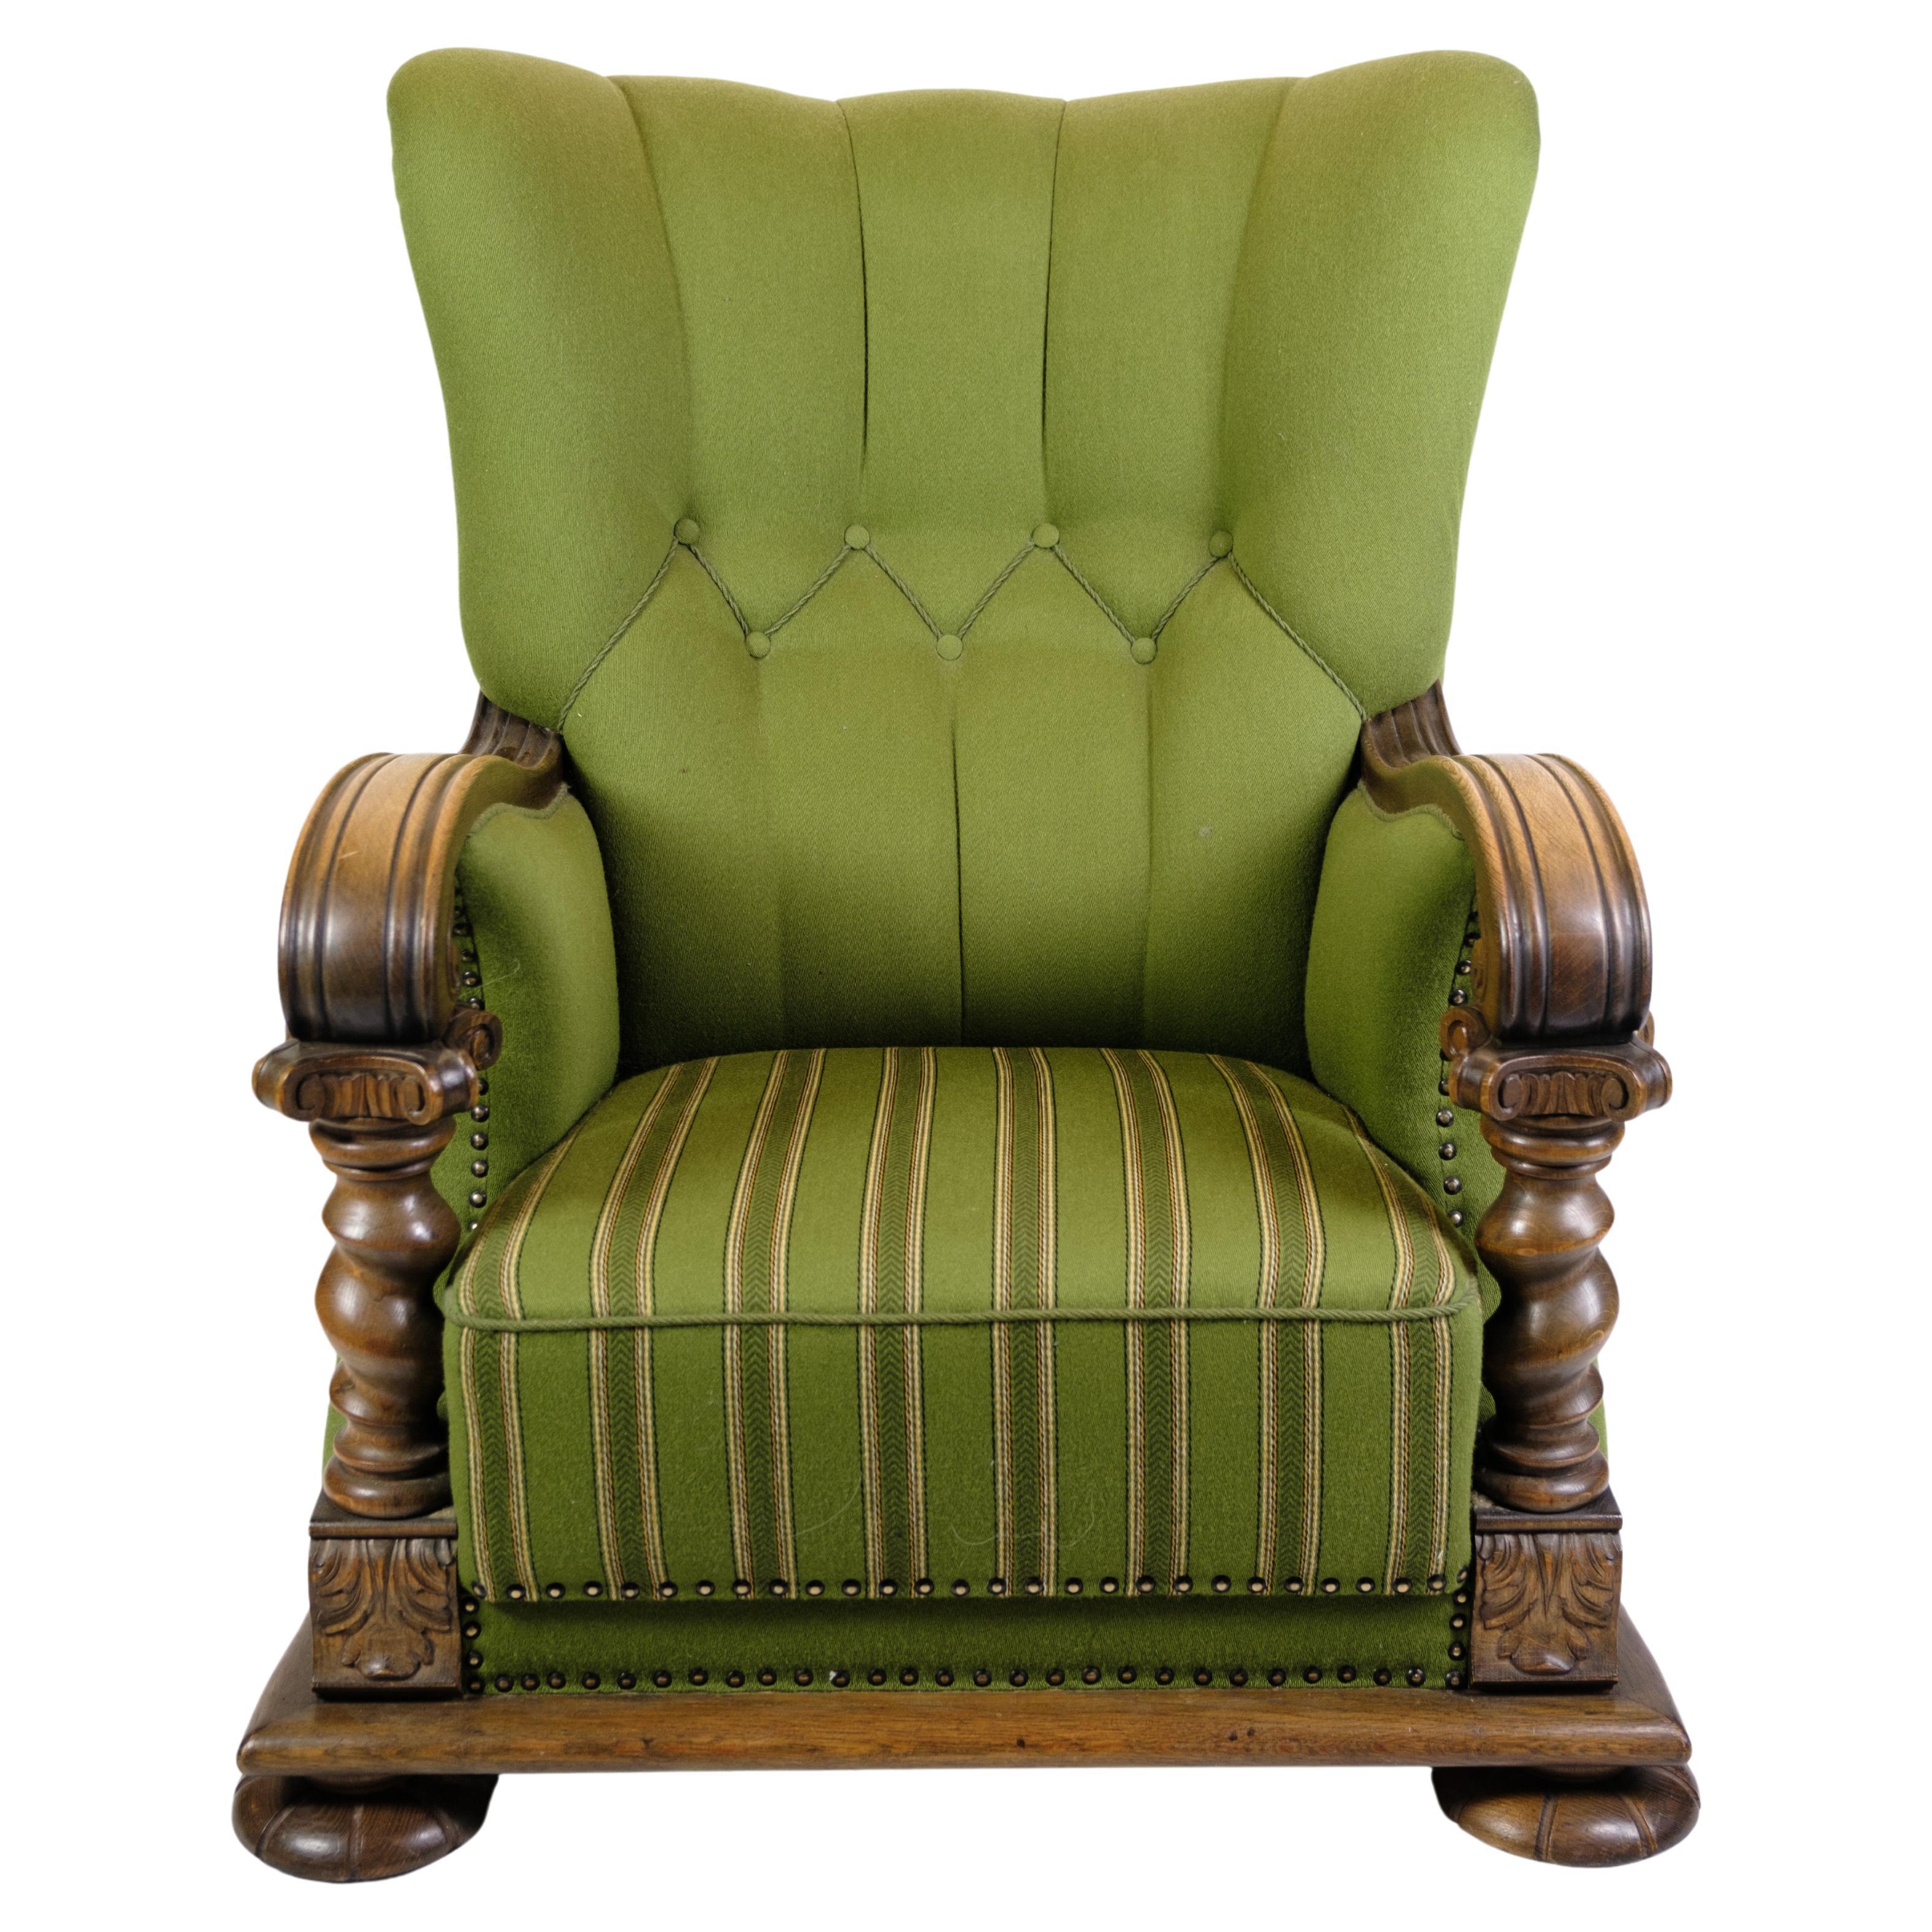 High-backed Armchair in Green fabric with Wood Carvings from 1920s. For Sale